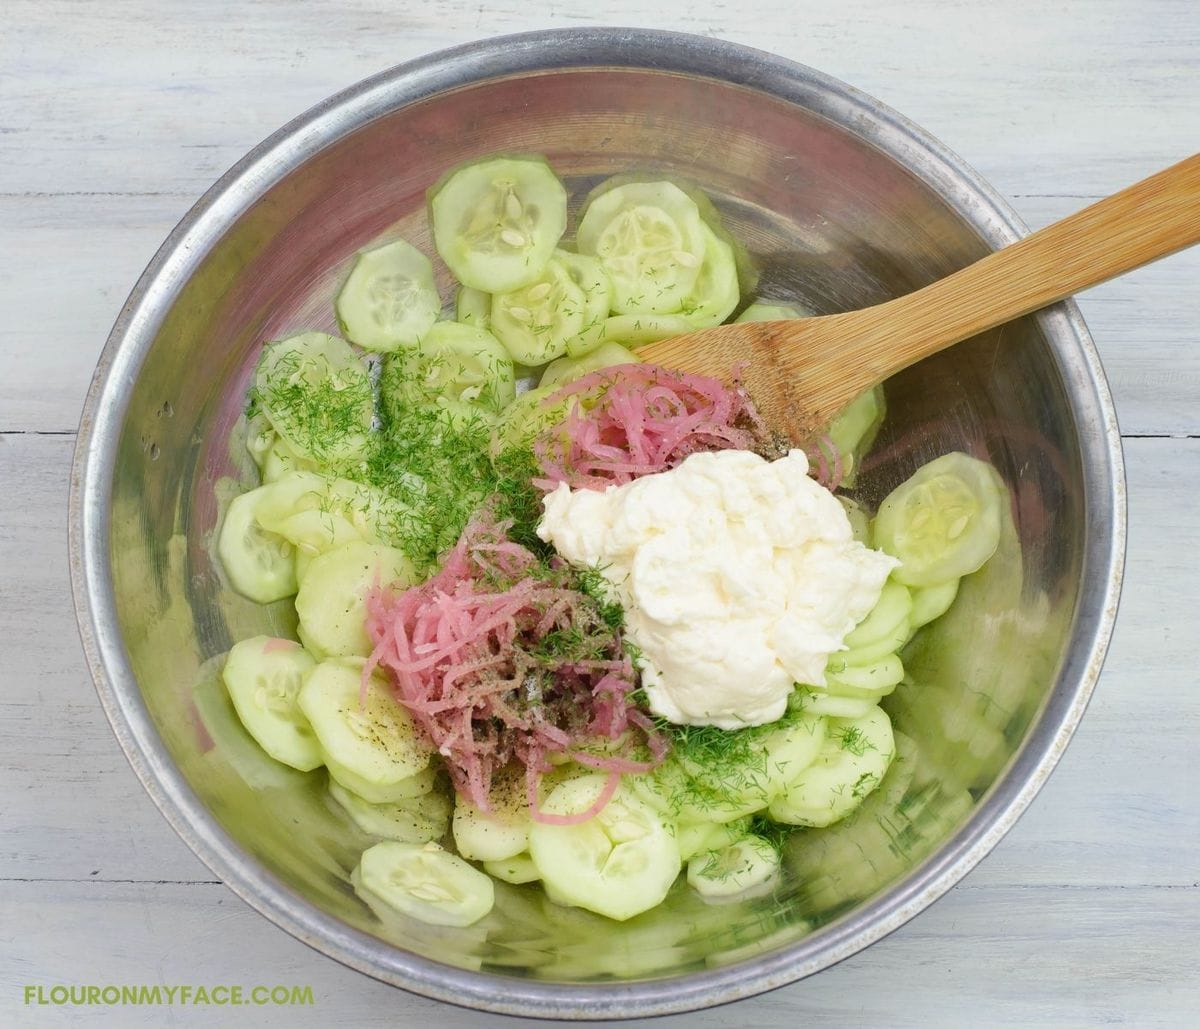 A mixing bowl filled with cucumber and onion salad before mixing the ingredients.